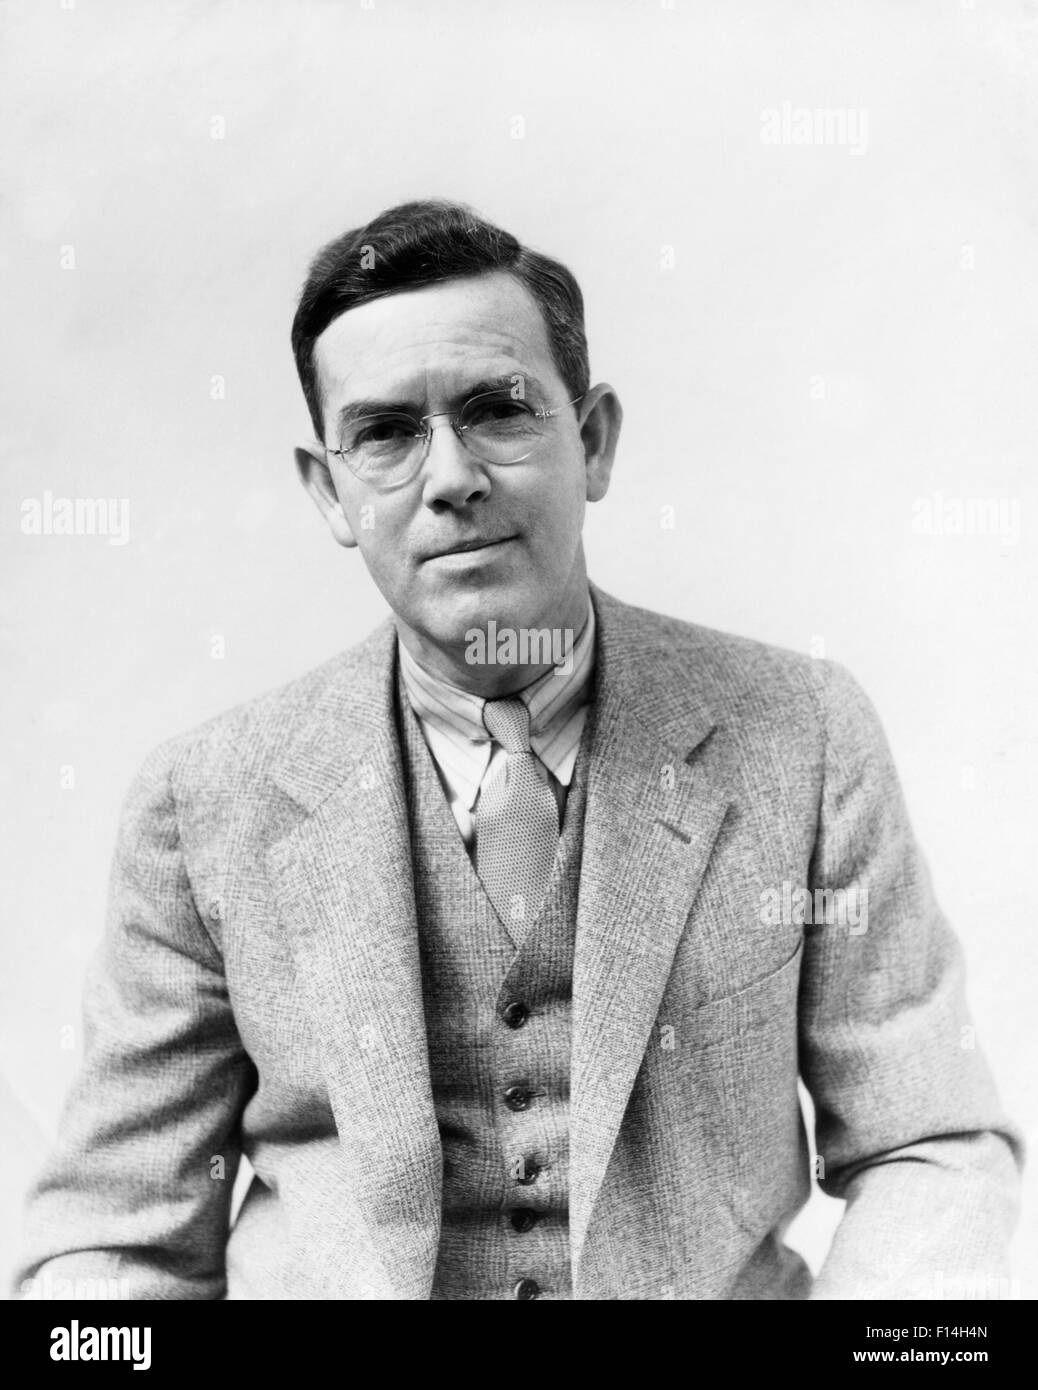 1930 PHOTOGRAPHE PORTRAIT MAN H. ARMSTRONG ROBERTS portant des lunettes  gilet costume cravate LOOKING AT CAMERA Photo Stock - Alamy